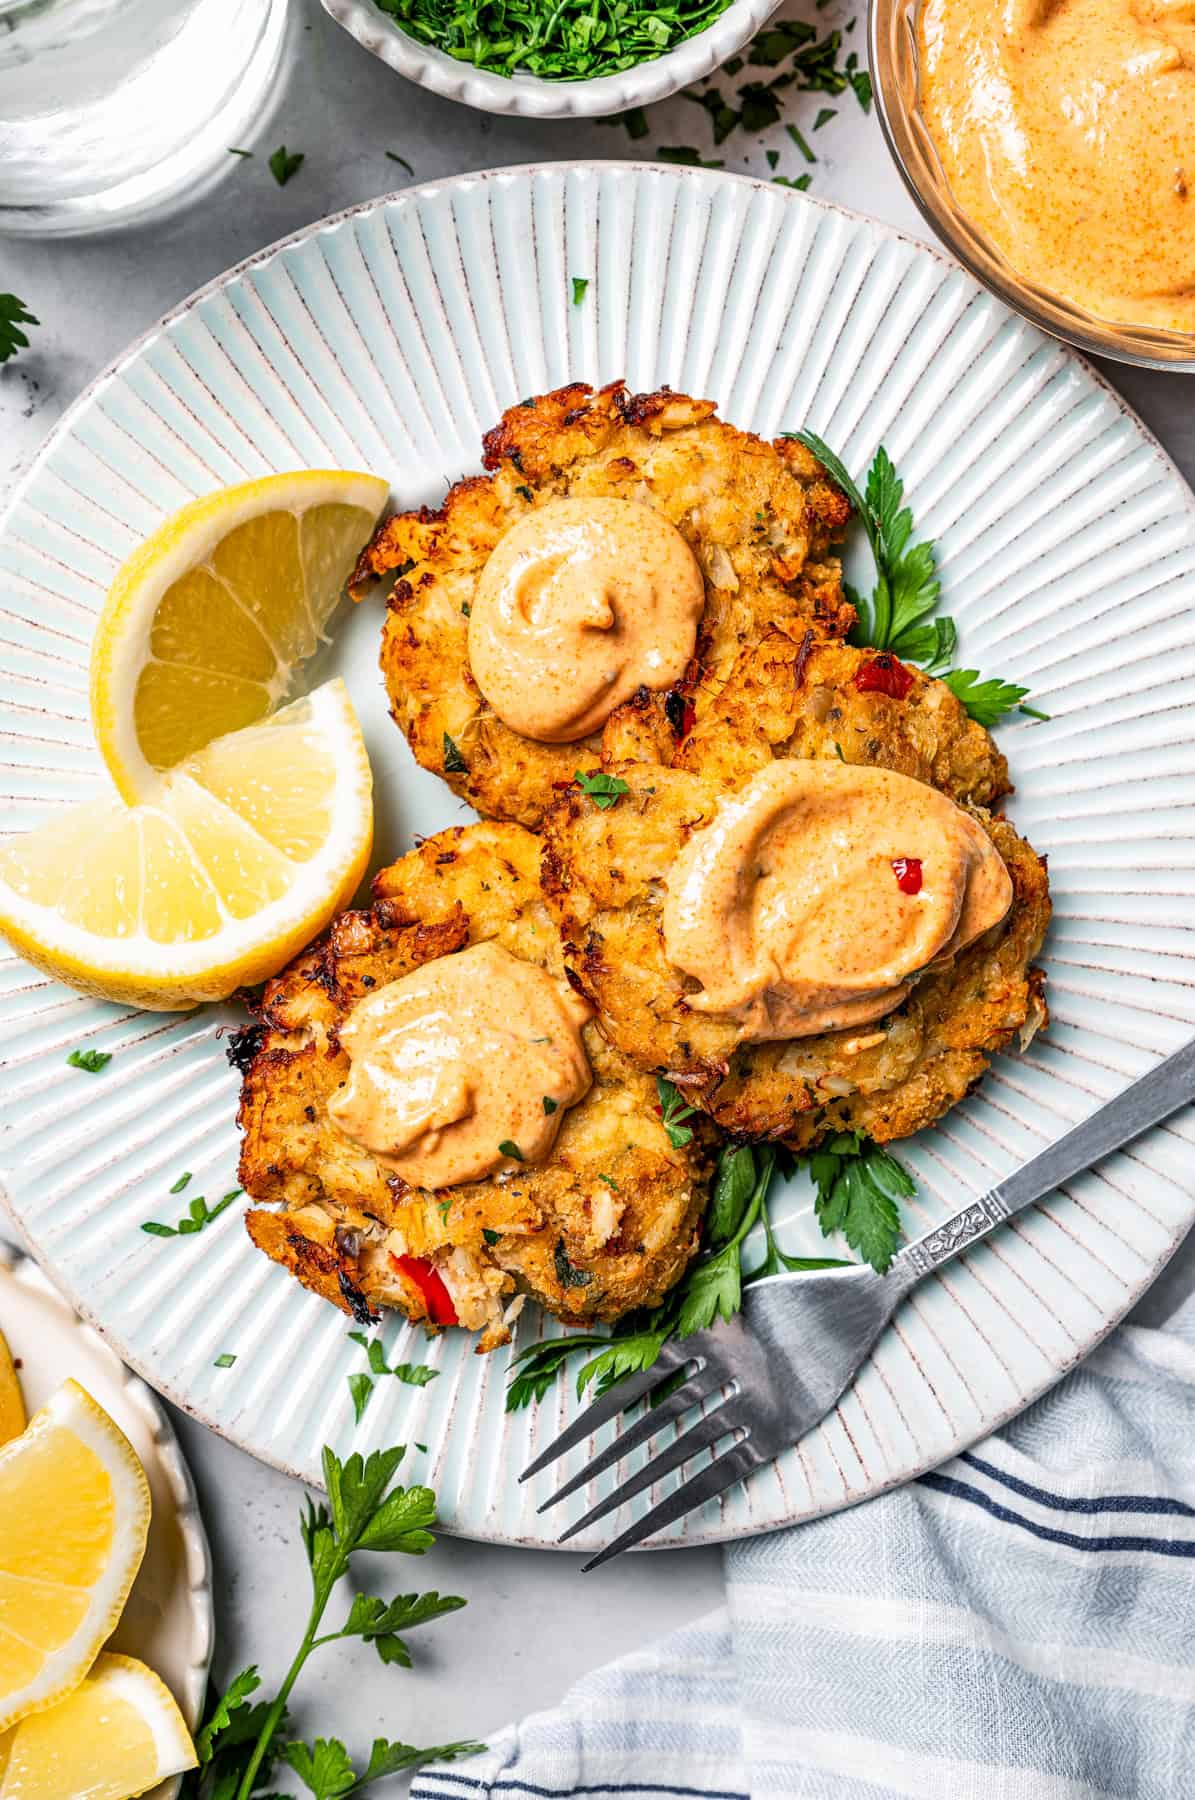 Overhead view of three air fried crab cakes topped with remoulade and garnished with lemon wedges on a white plate, next to a fork.